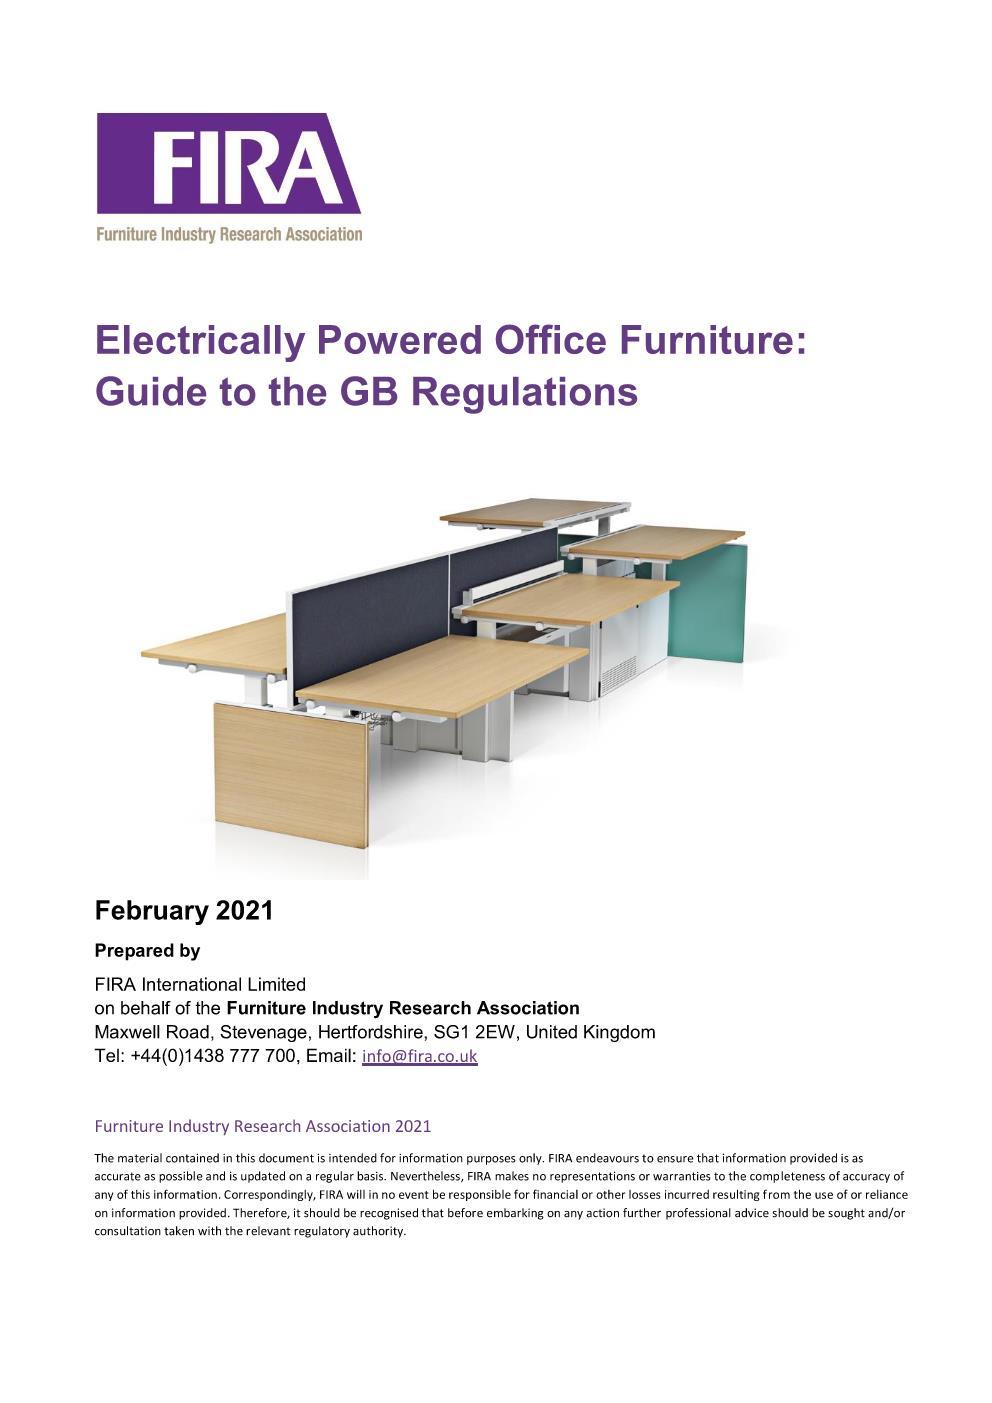 Electrically Powered Office Furniture: Guide to the GB Regulations